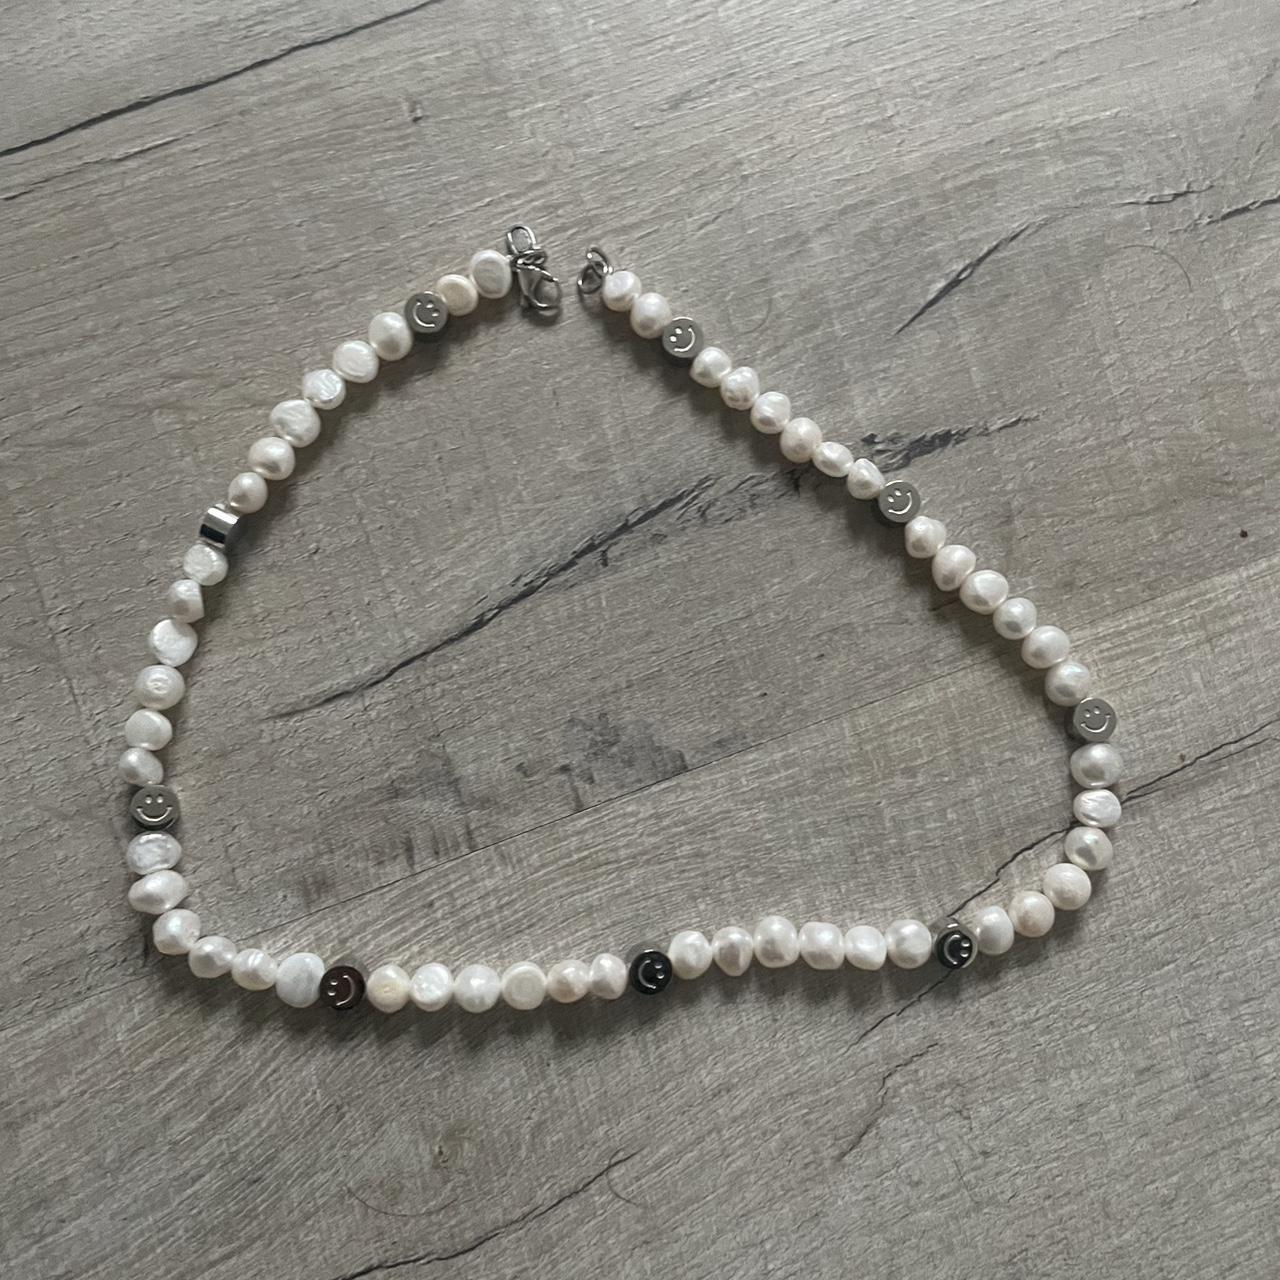 Craftd London Smiley Real Pearl Necklace (Silver) - Depop